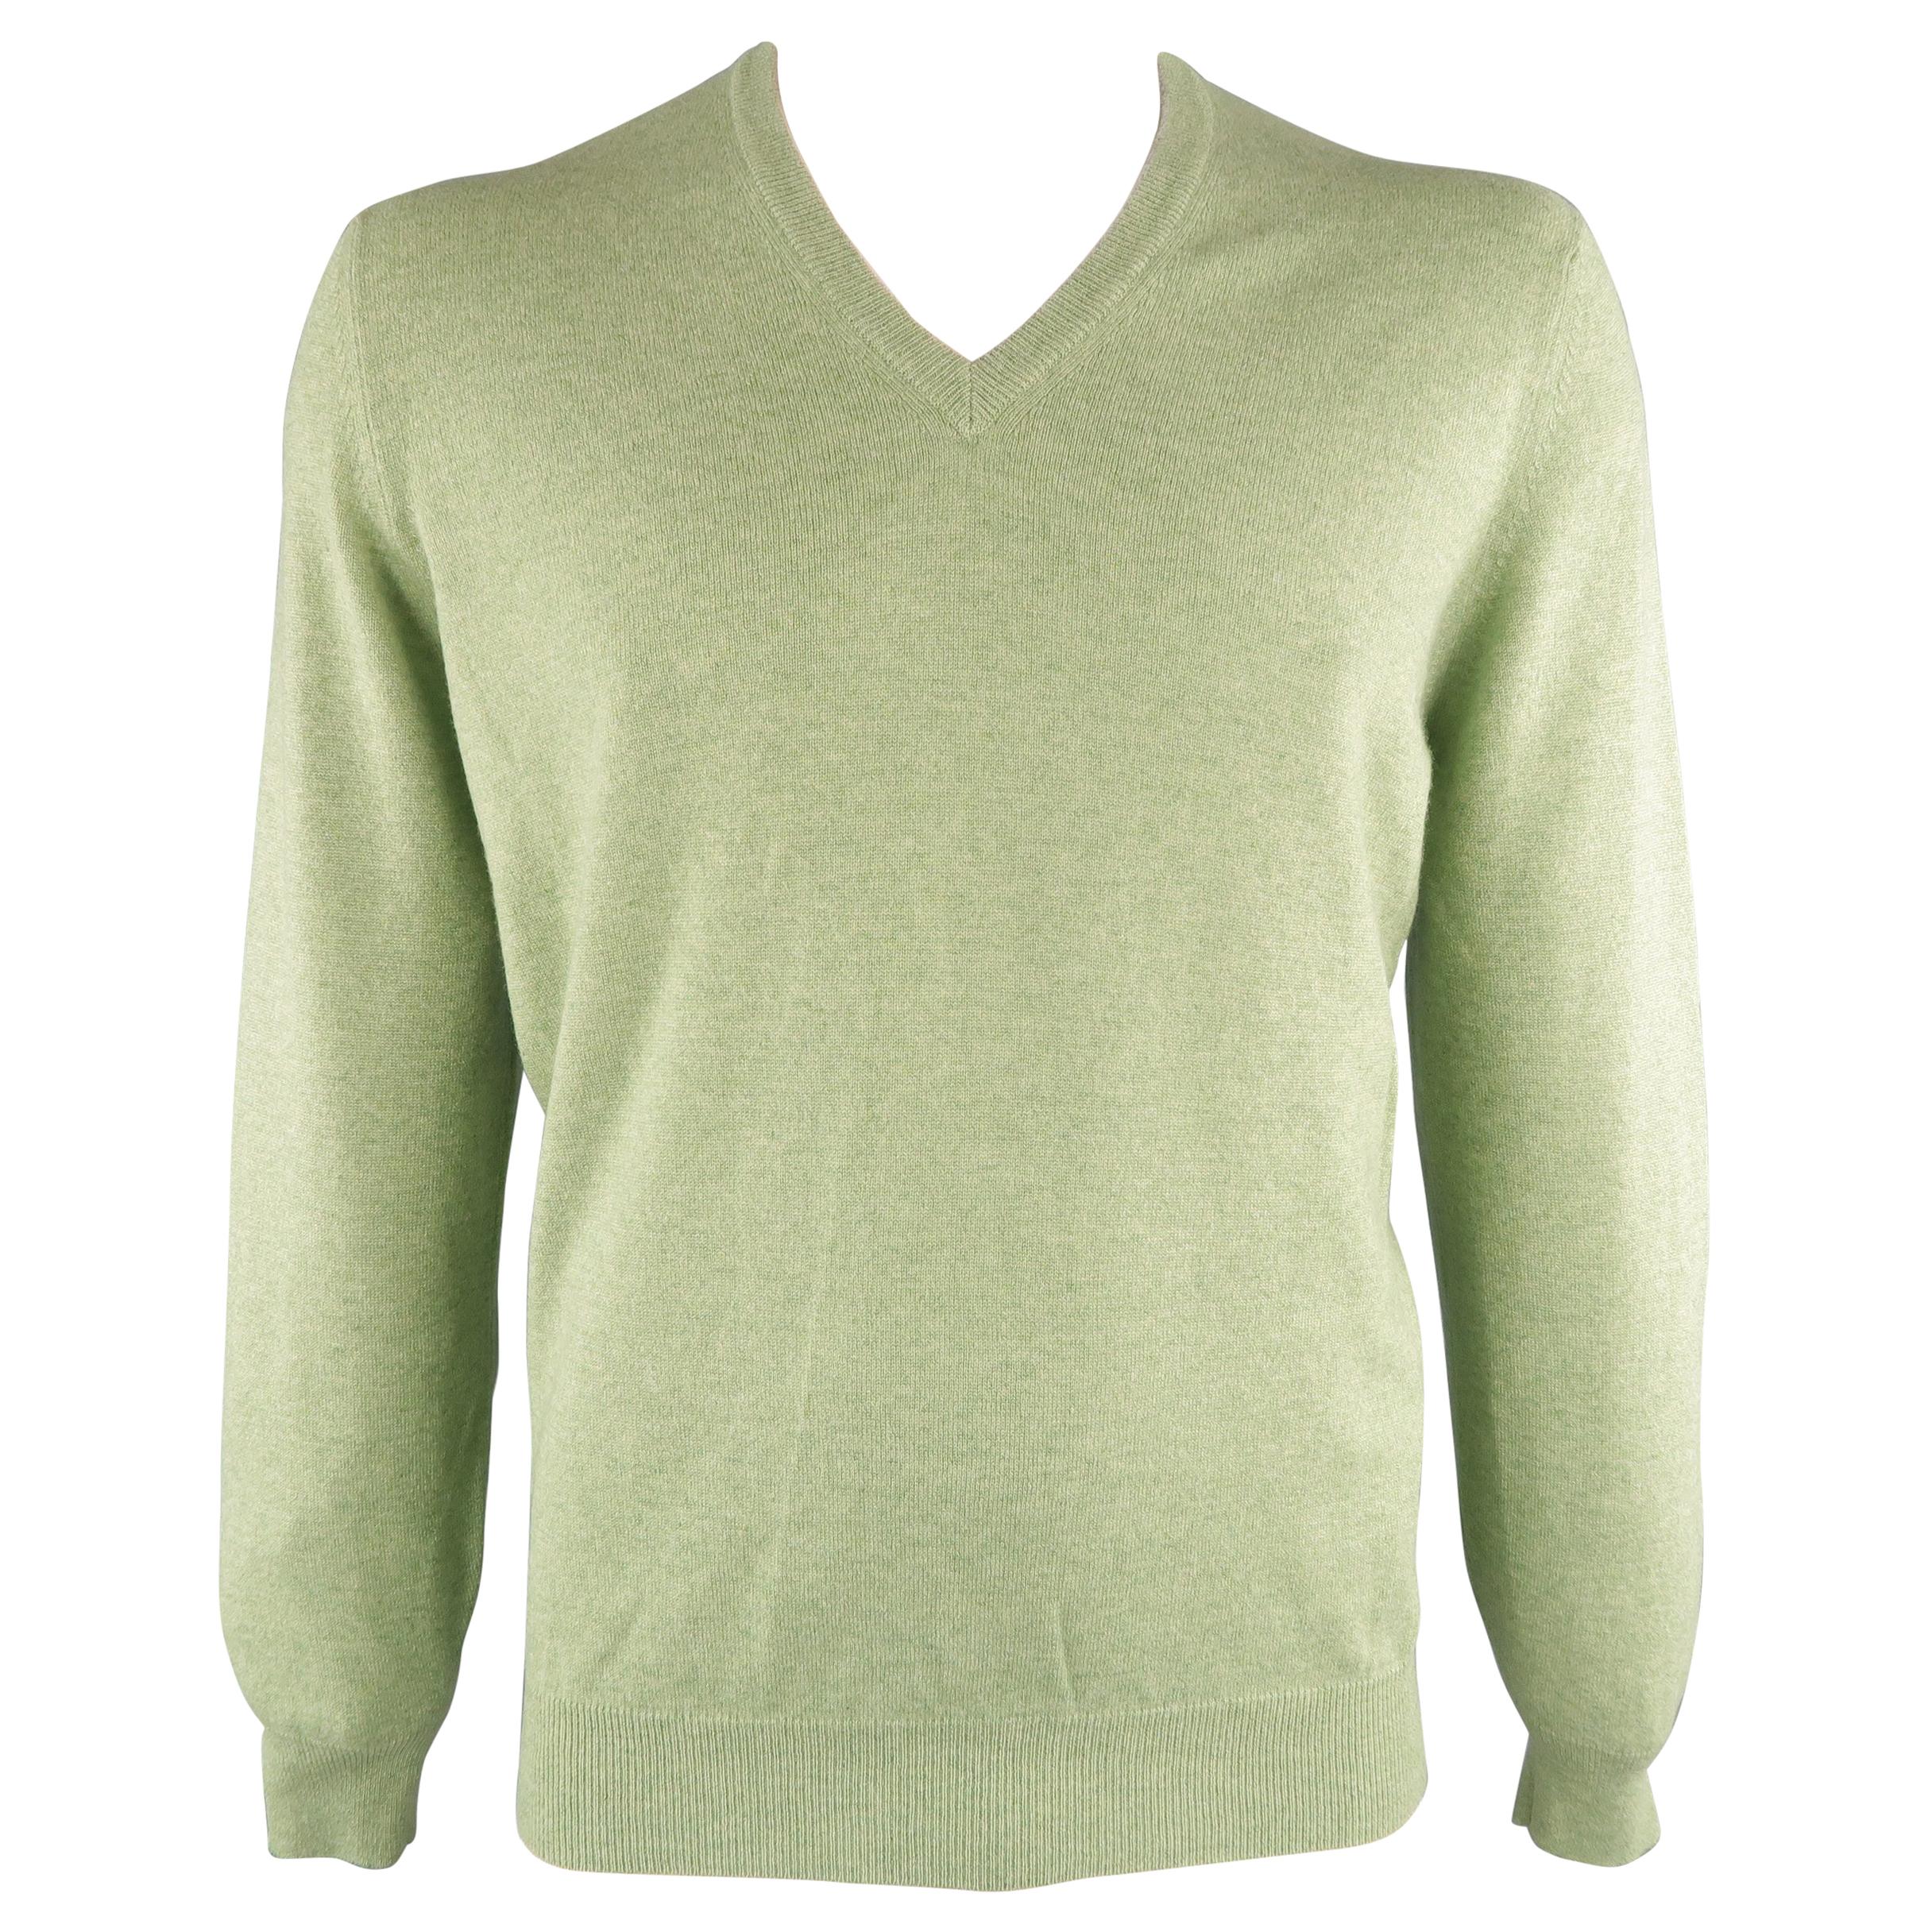 BRUNELLO CUCINELLI Size 44 Green Knitted Cashmere V-neck Sweater